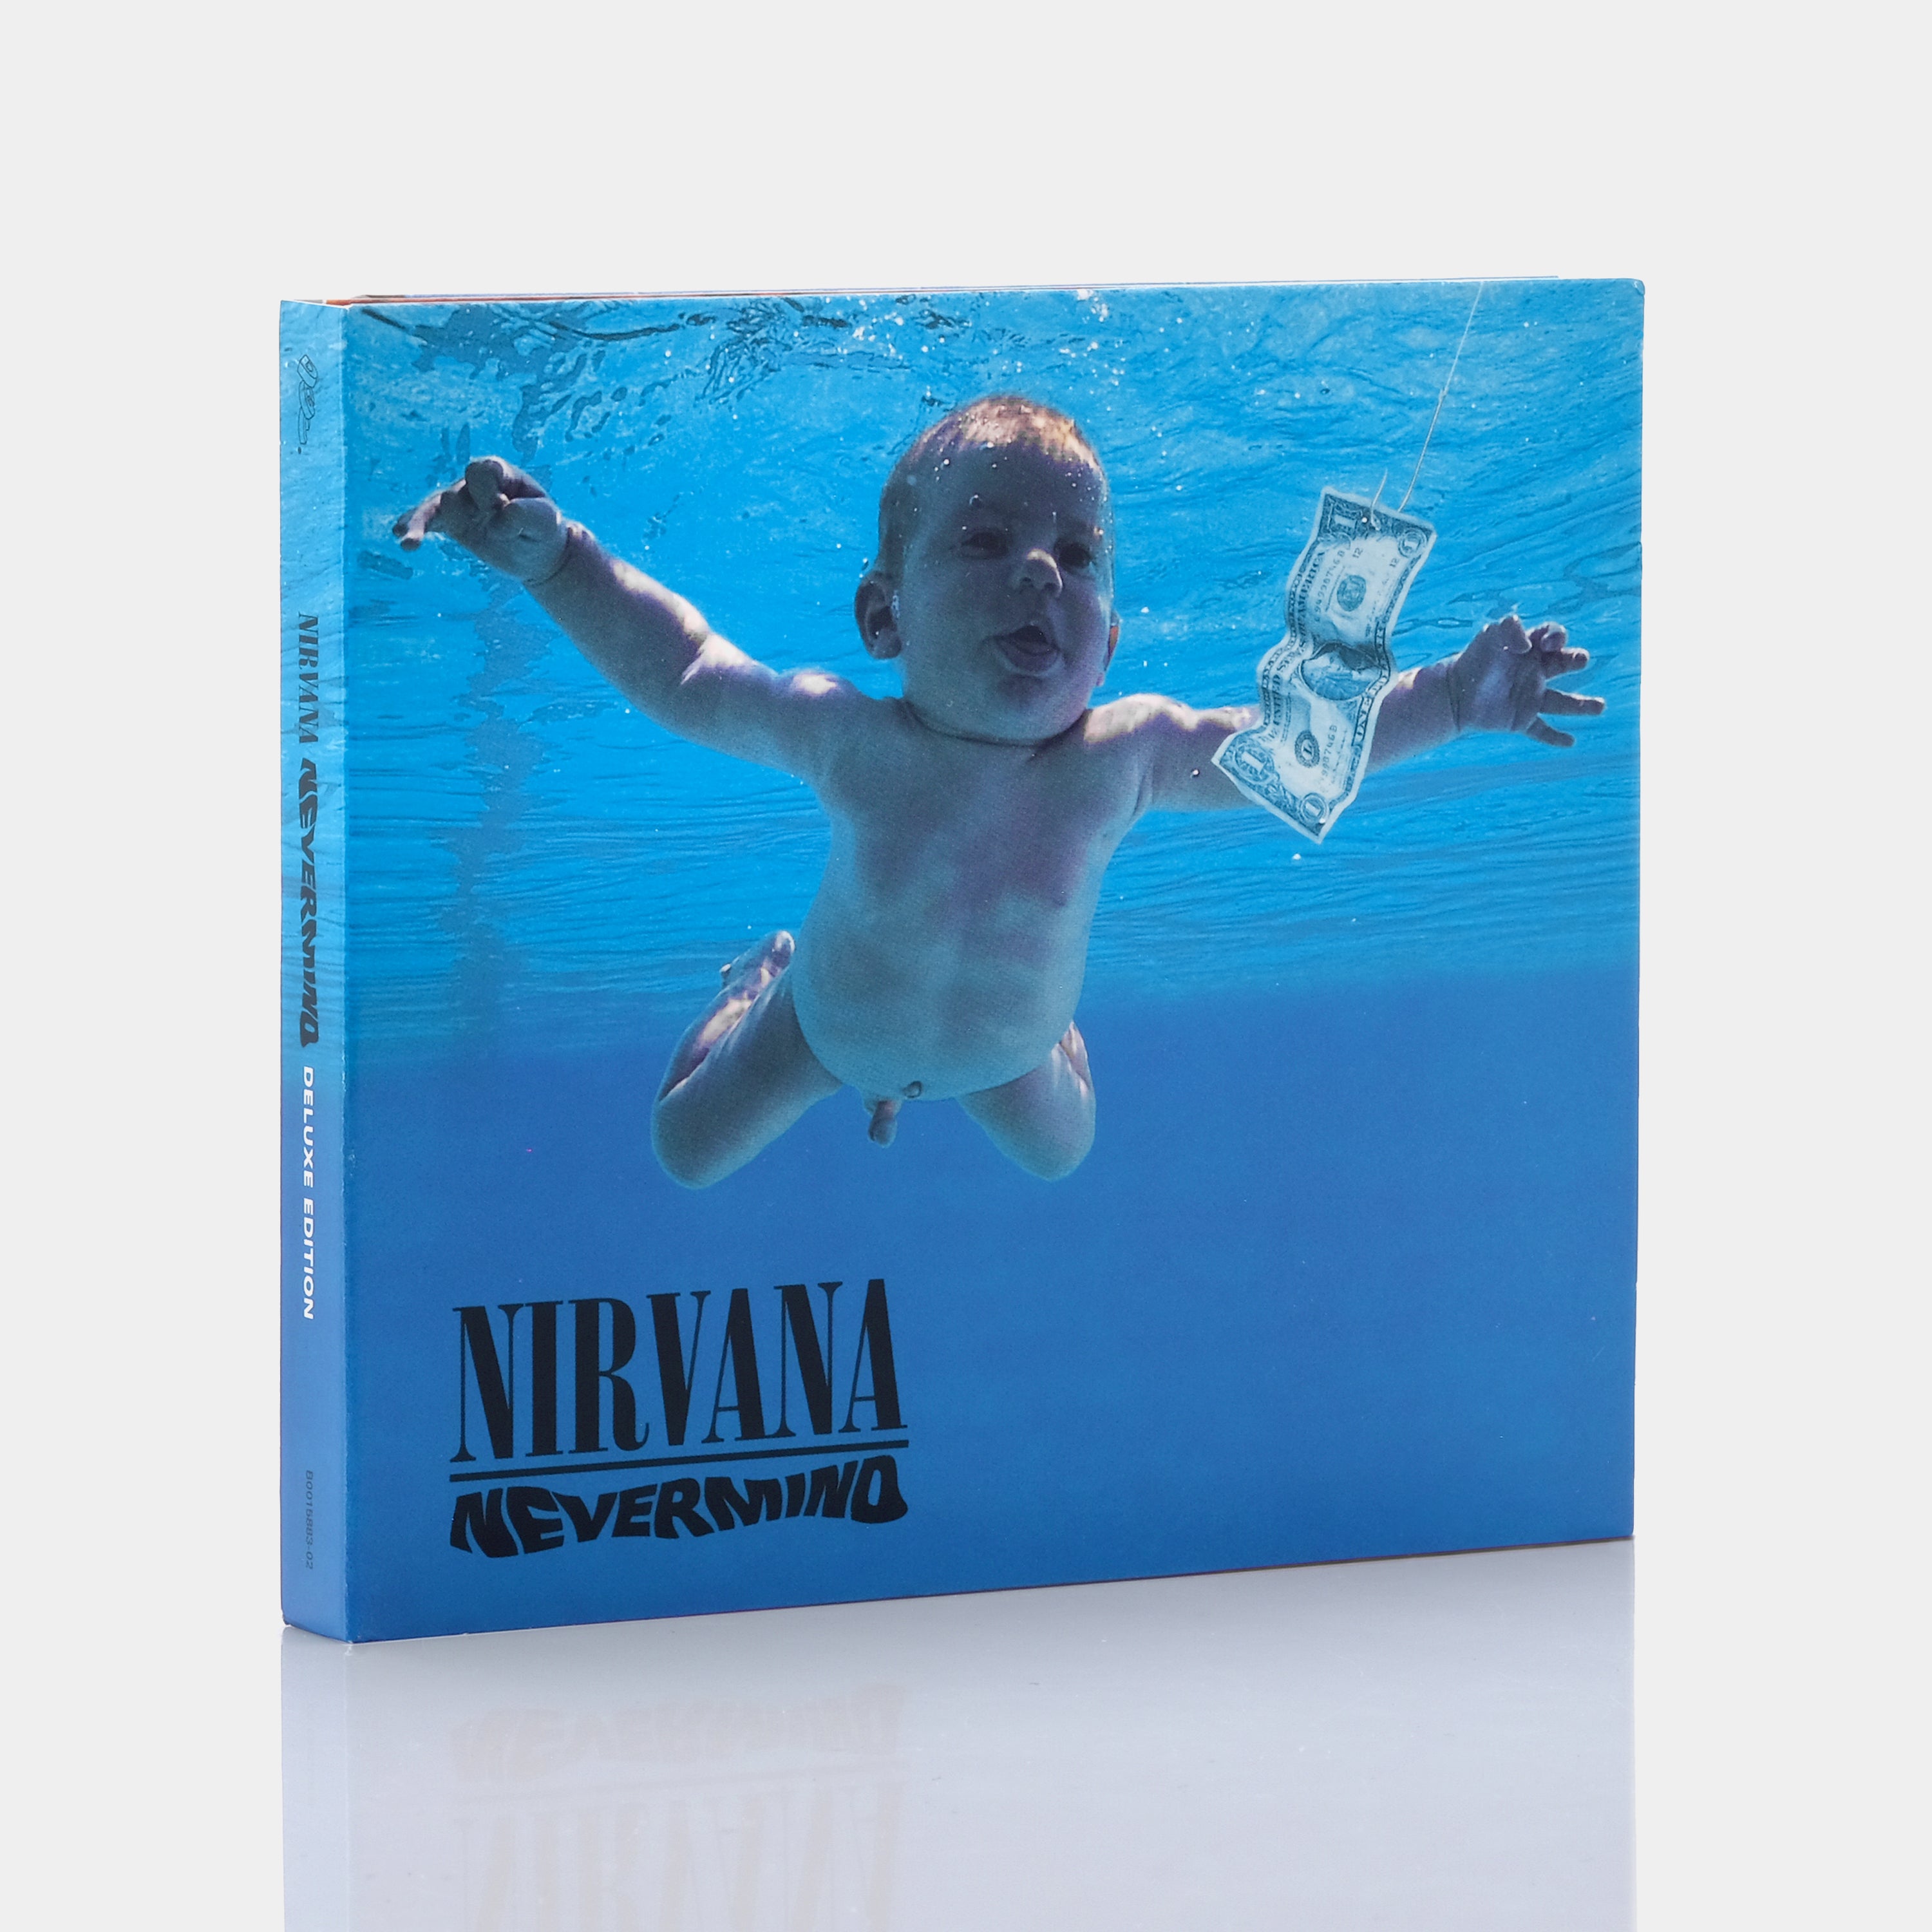 Nirvana - Nevermind (Deluxe Edition) 2xCD